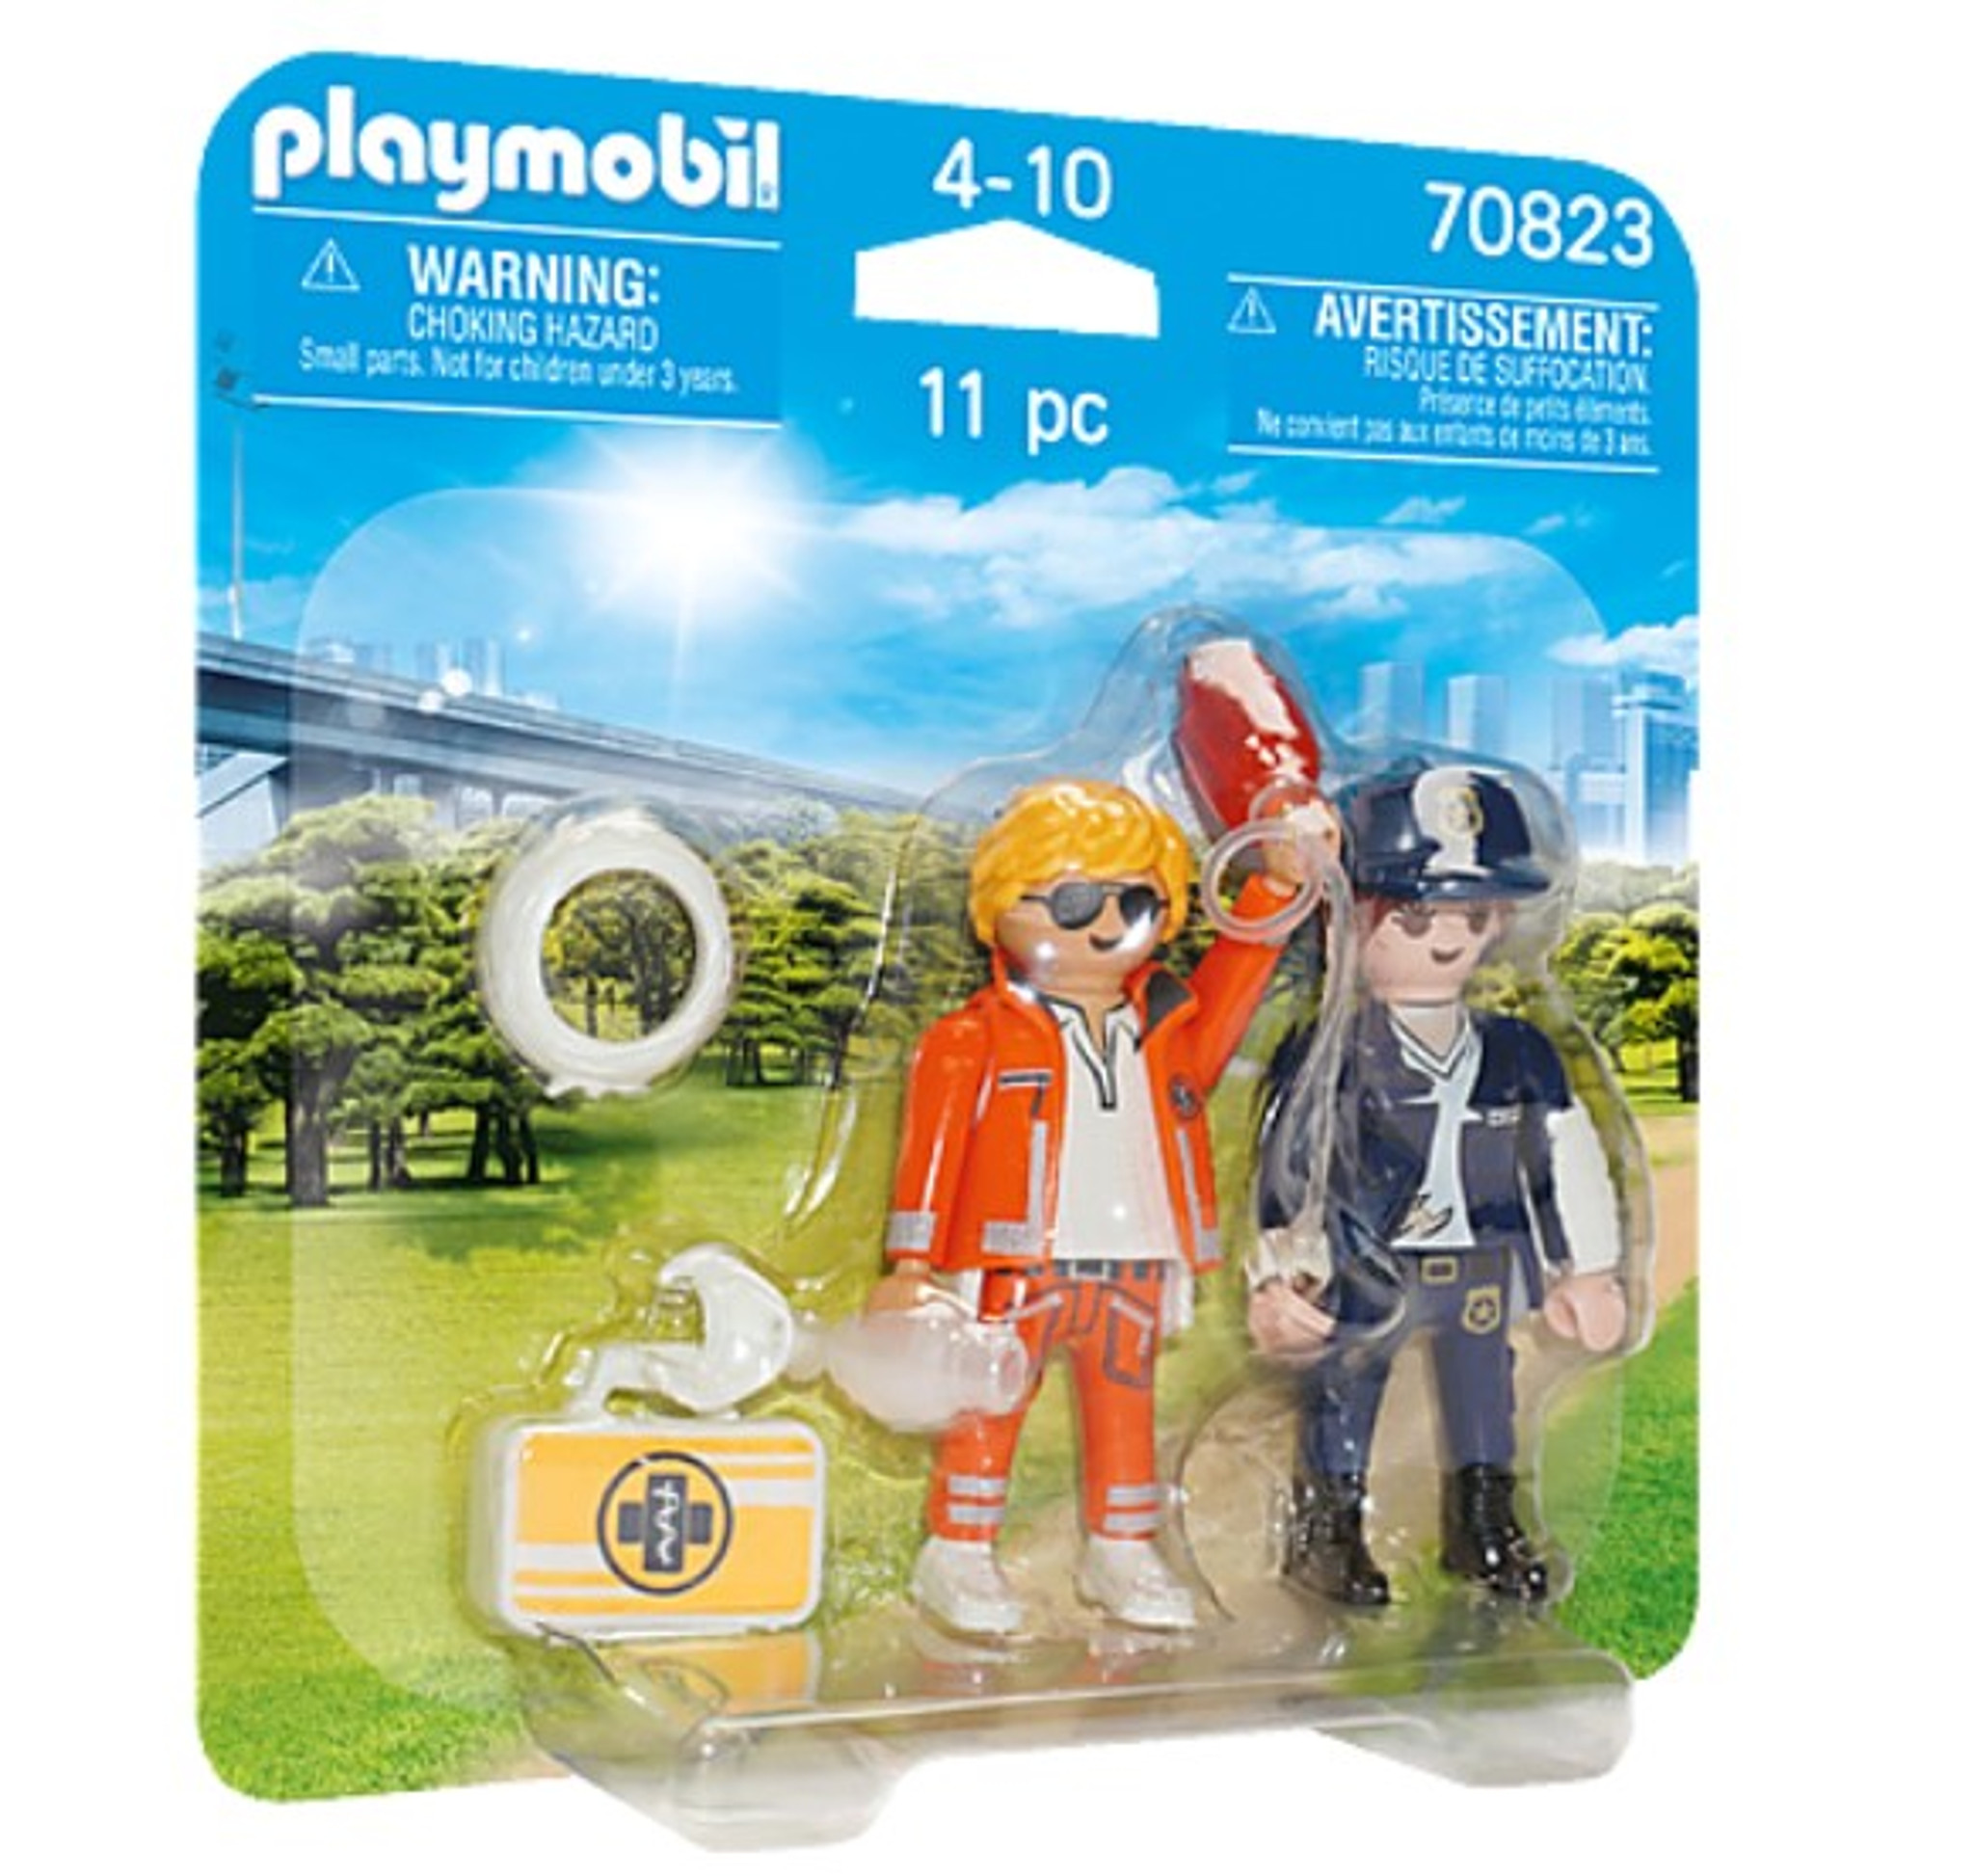 Playmobil Figures - Duo Pack Doctor and Police Officer - The Smiley Barn